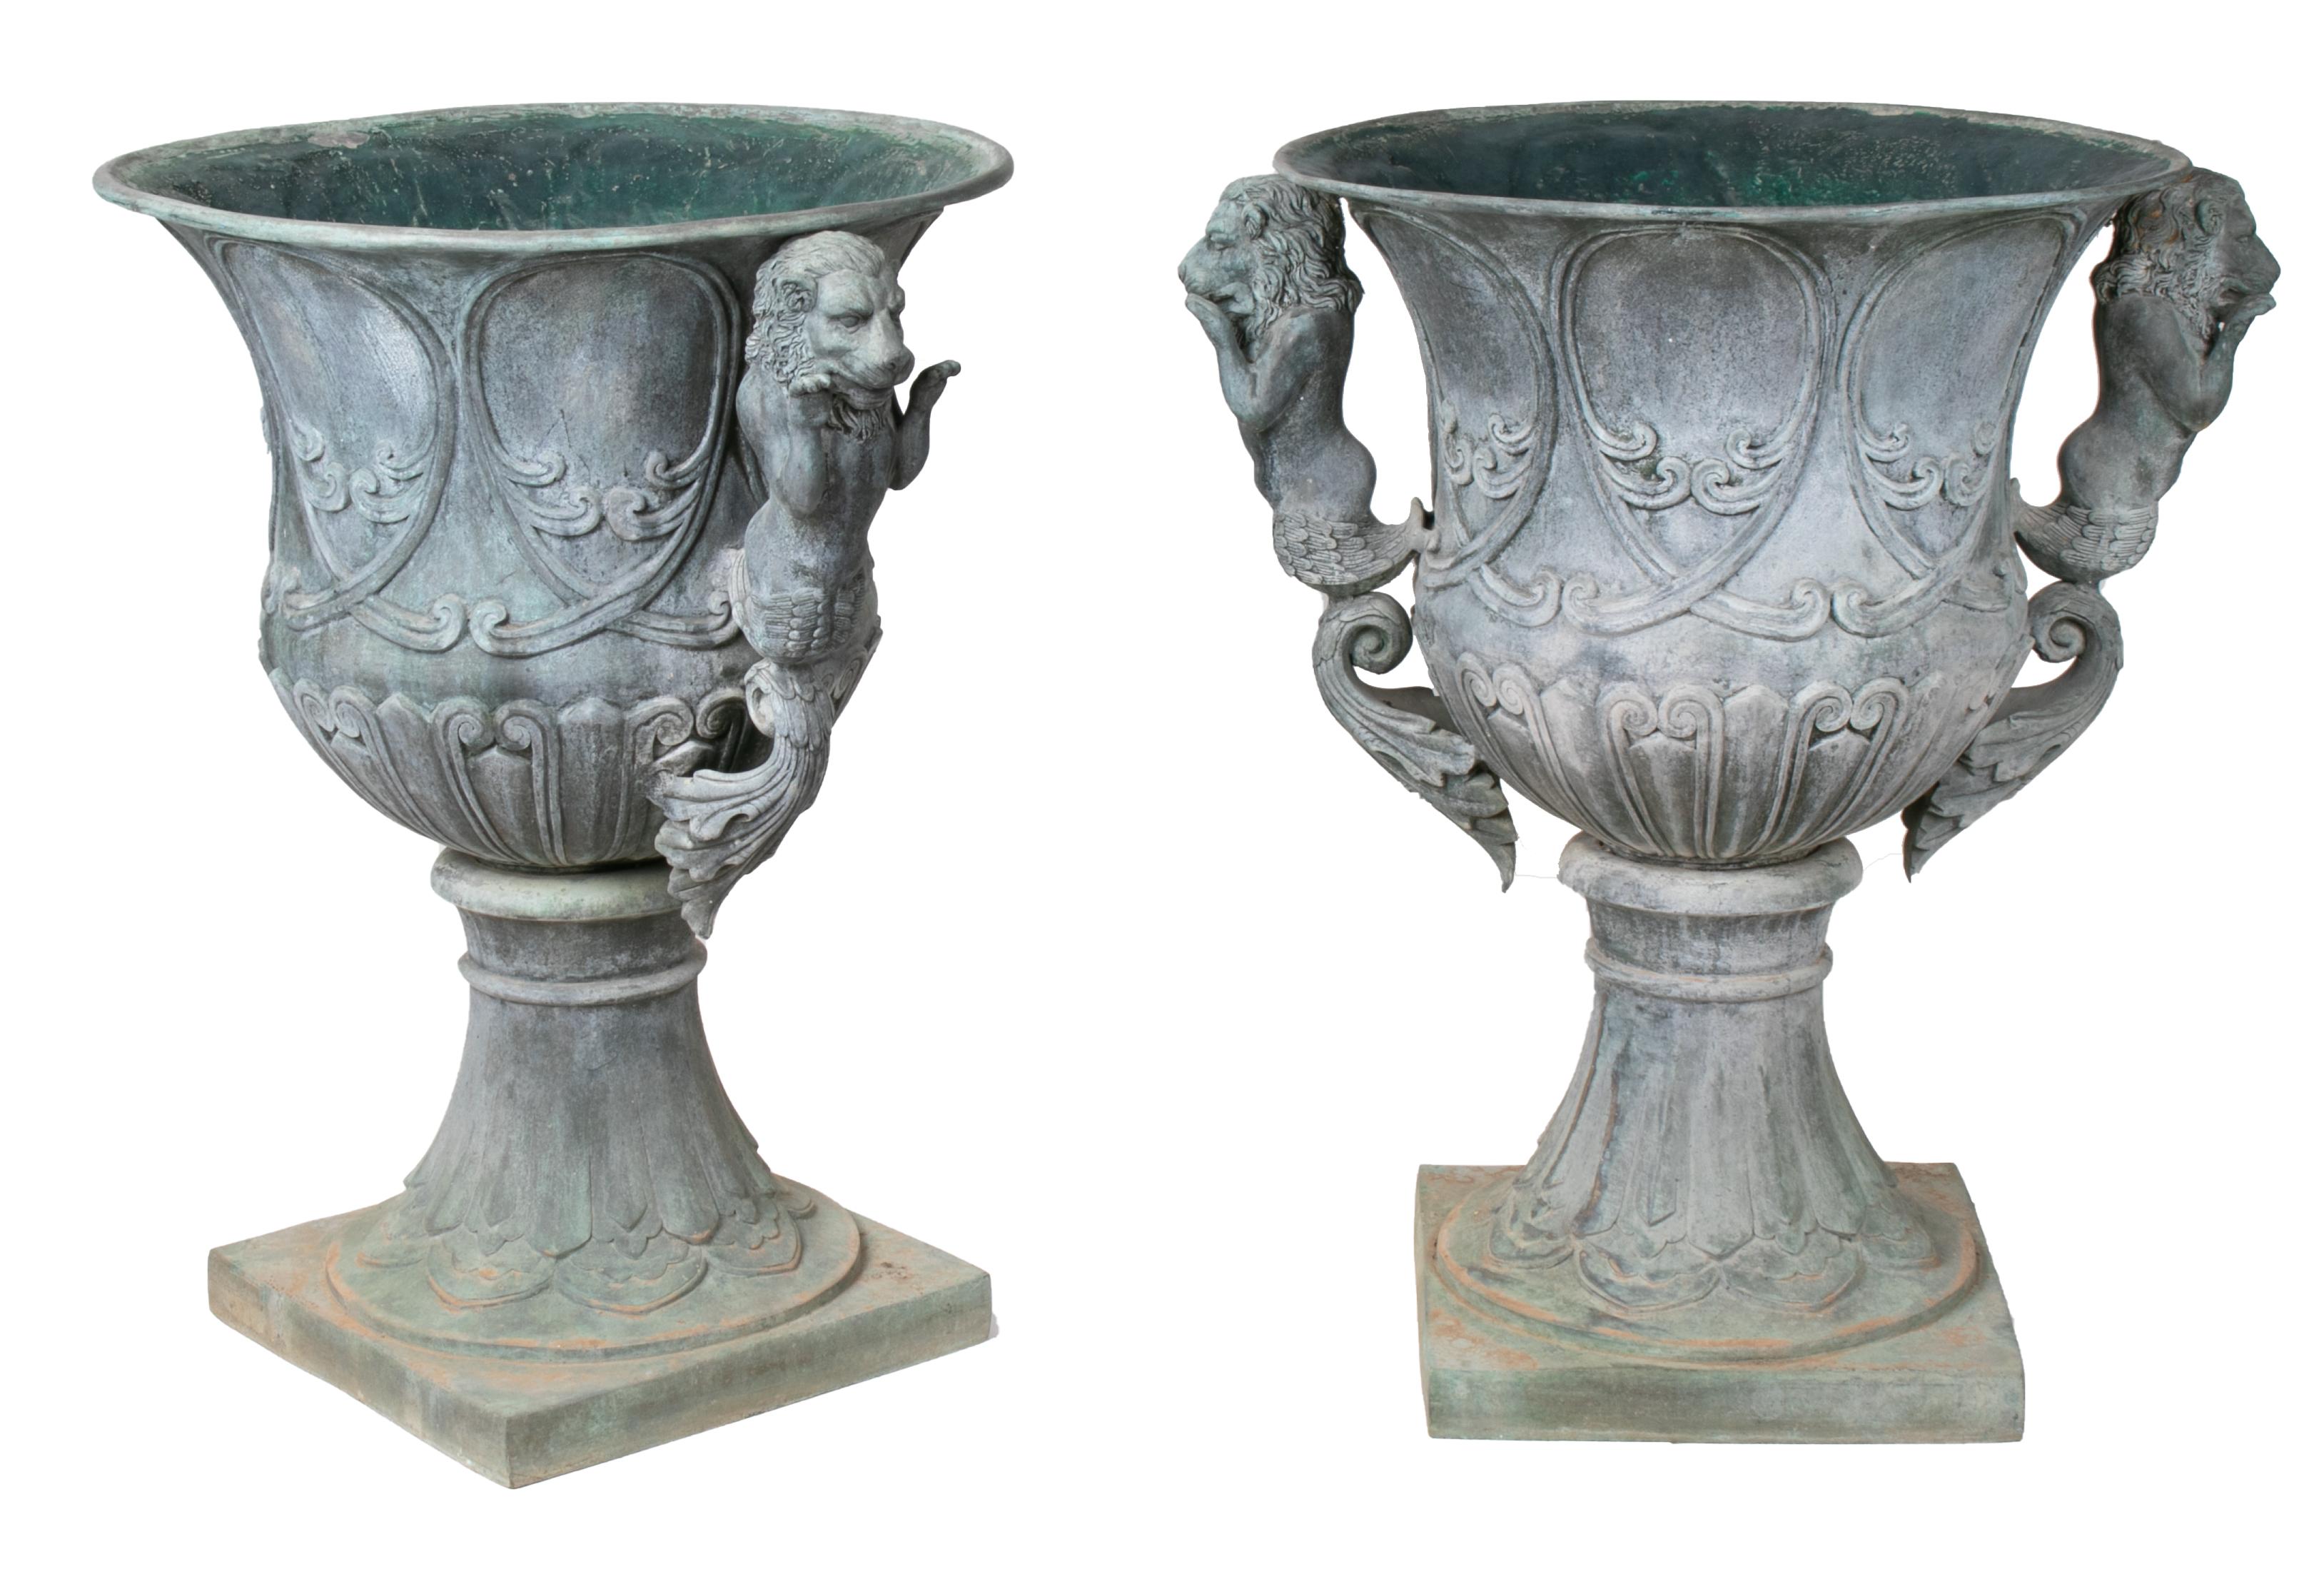 Pair of bronze garden urns with lions in old green patina.